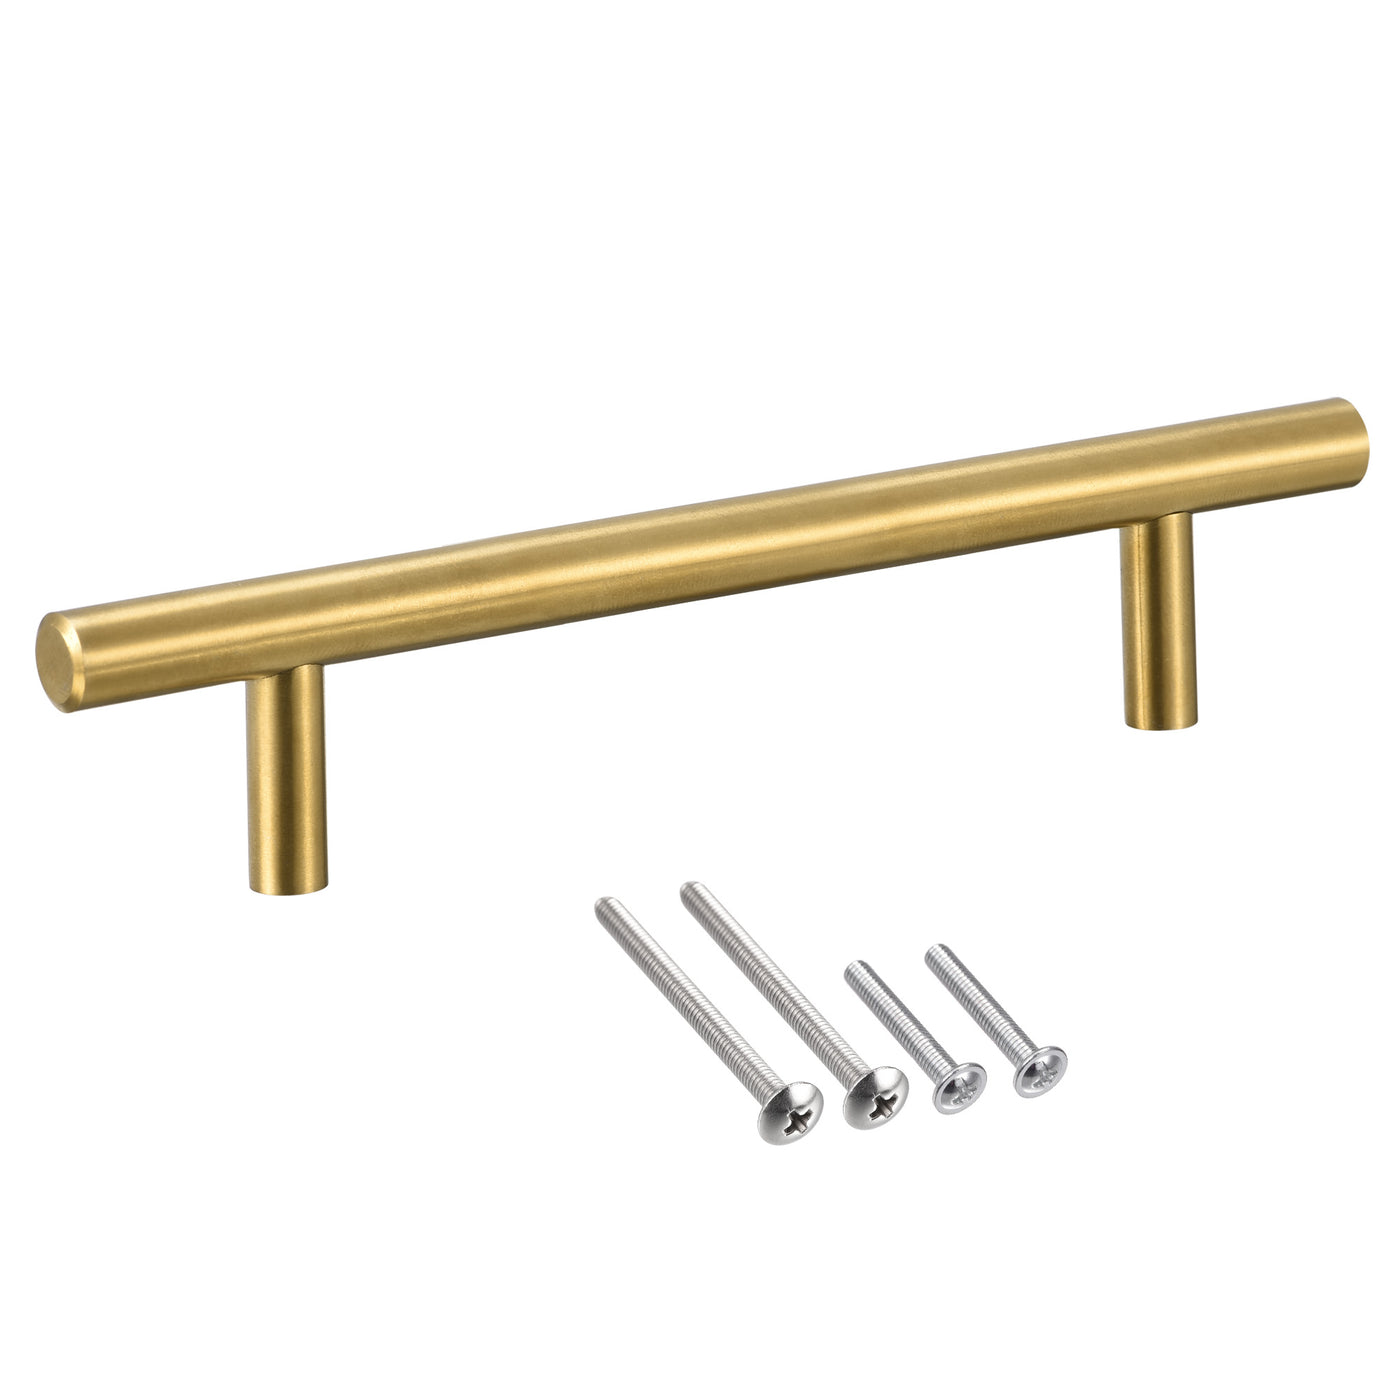 uxcell Uxcell T Bar Pull Handle, 8"(200mm) Length 10mm Dia Stainless Steel Cabinet Pulls 5"(128mm) Hole Center Distance Gold Tone 2pcs